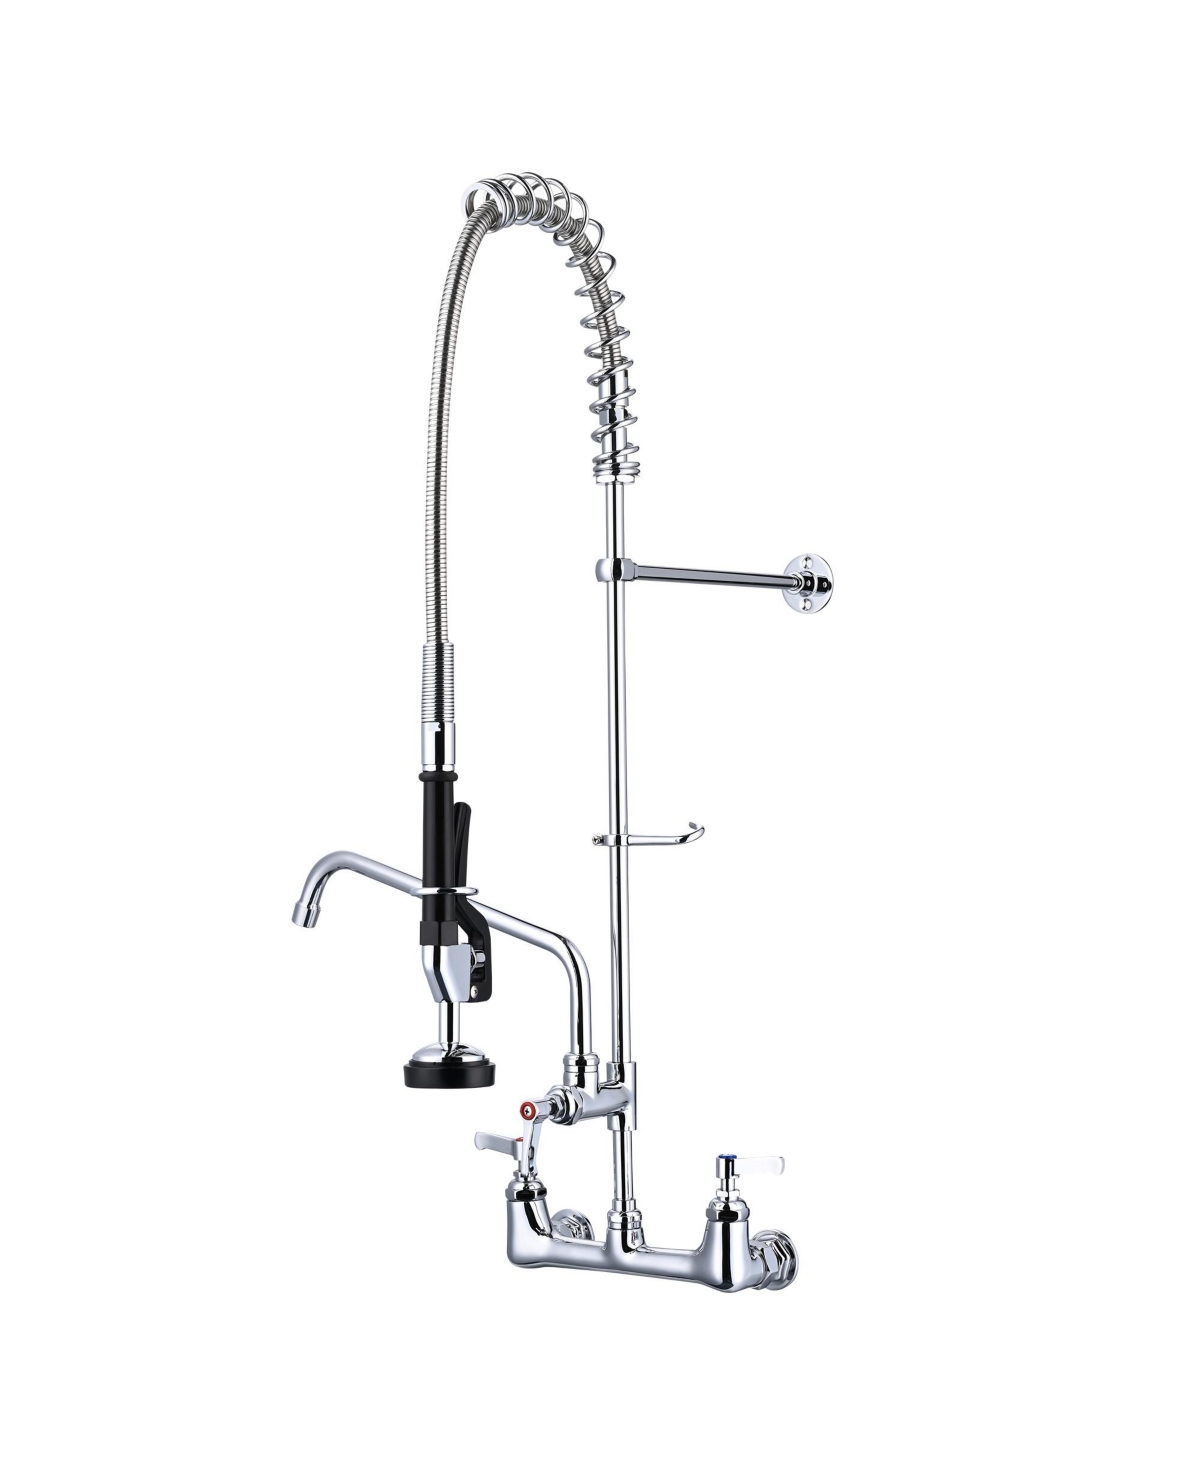 Wall Mount Pre-Rinse Faucet Kitchen Sink 36" Height Sprayer Home - Silver